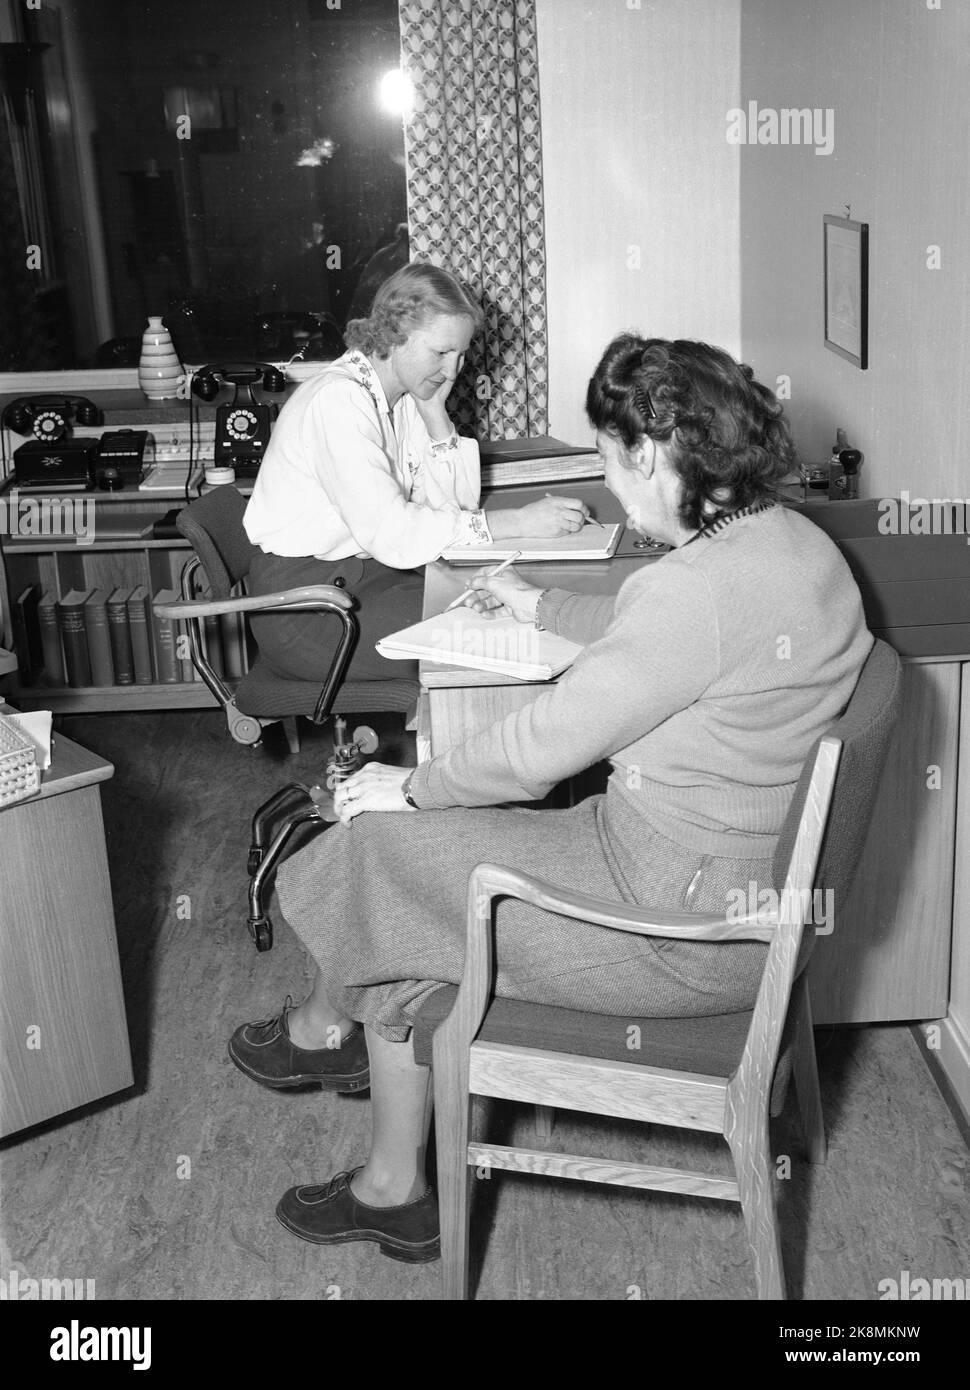 Oslo 1951 the wage settlement Two women in an office. The national organization and the employer association were unable to negotiate agreement this time. The prime minister found that there was no basis for presenting a proposal that both parties could accept. Neither the national broker was able to persuade the parties to enter into a voluntary agreement. Wages will this time be determined by an impartial body, a payroll. Photo: Sverre A. Børretzen / Current / NTB Stock Photo